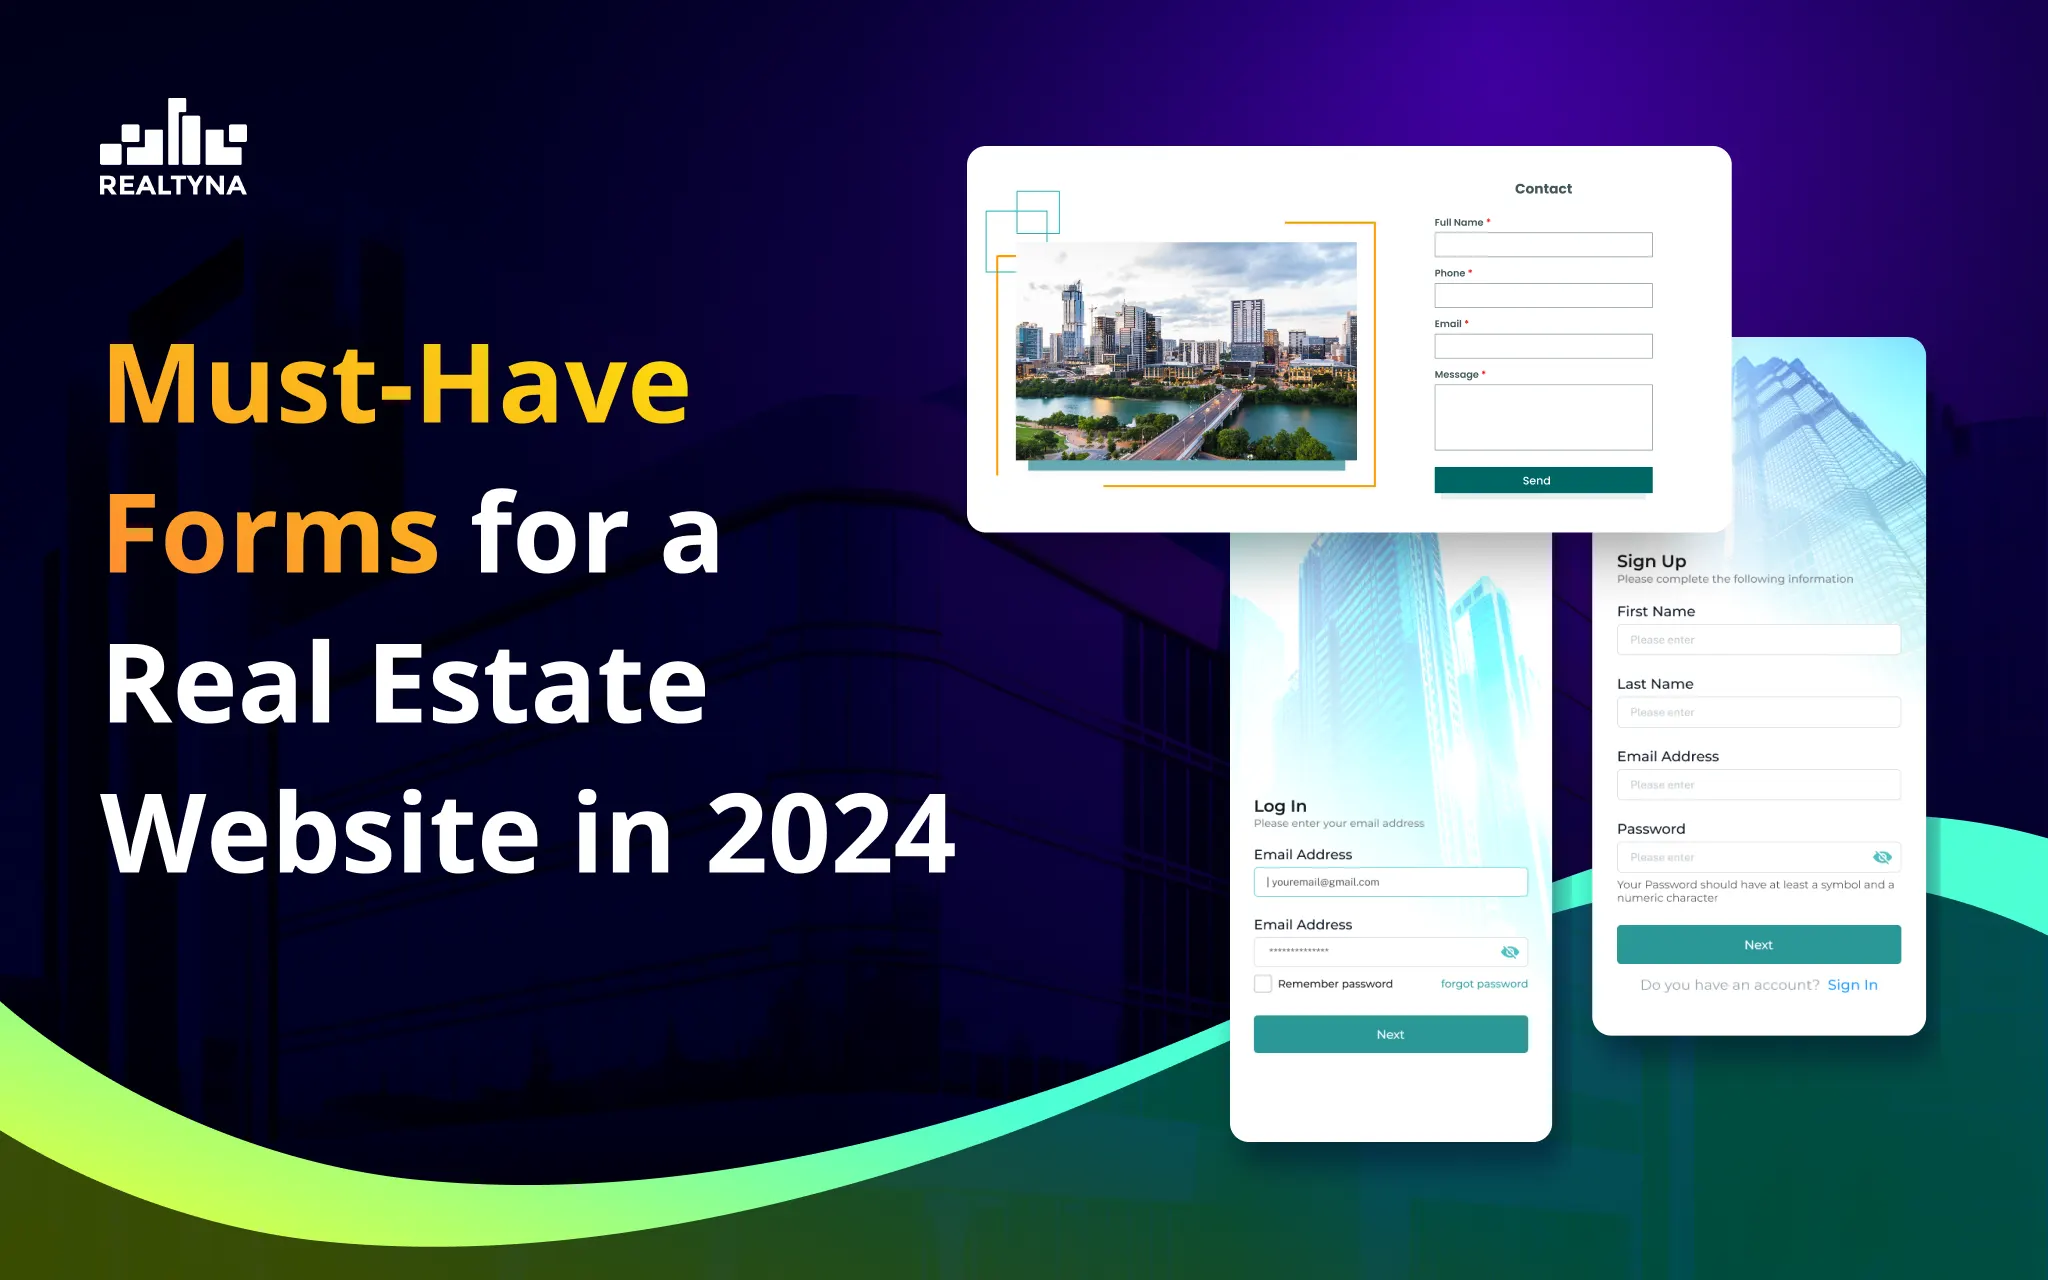 Must-Have Forms for a Real Estate Website in 2024